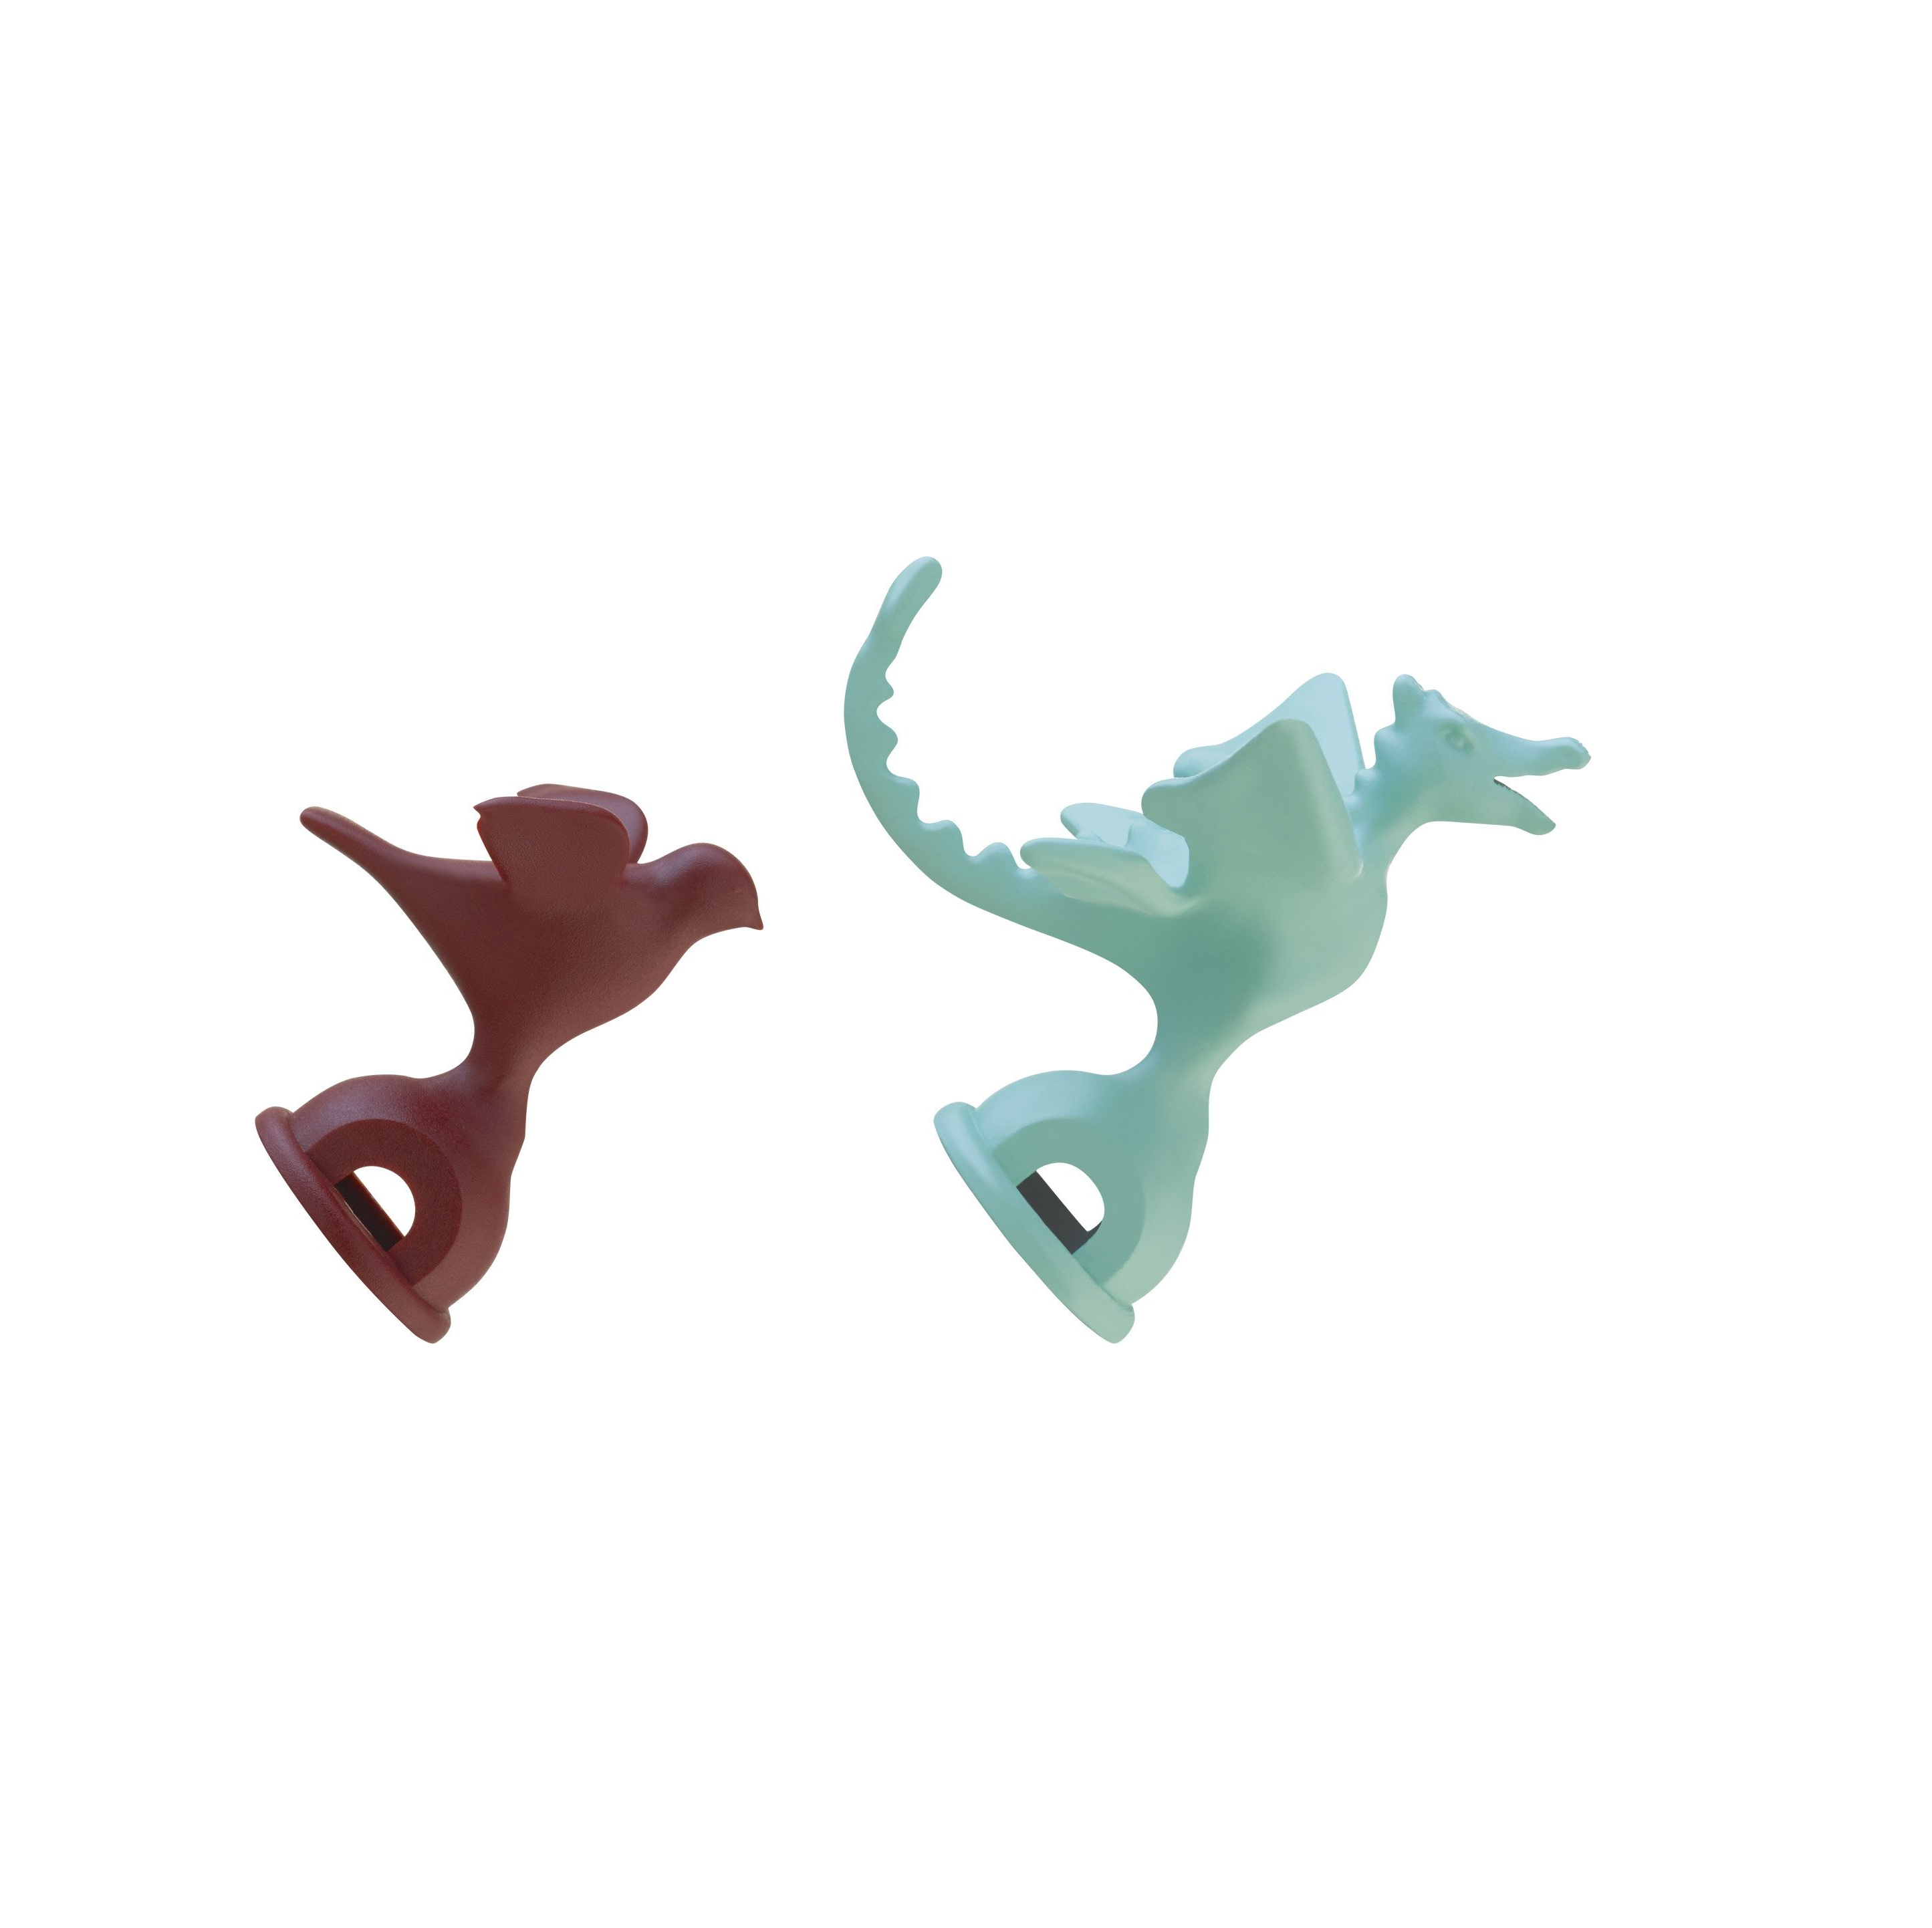 Replacement Alessi Bird replacement set (bird and dragon) 9093 Green and Burgundy